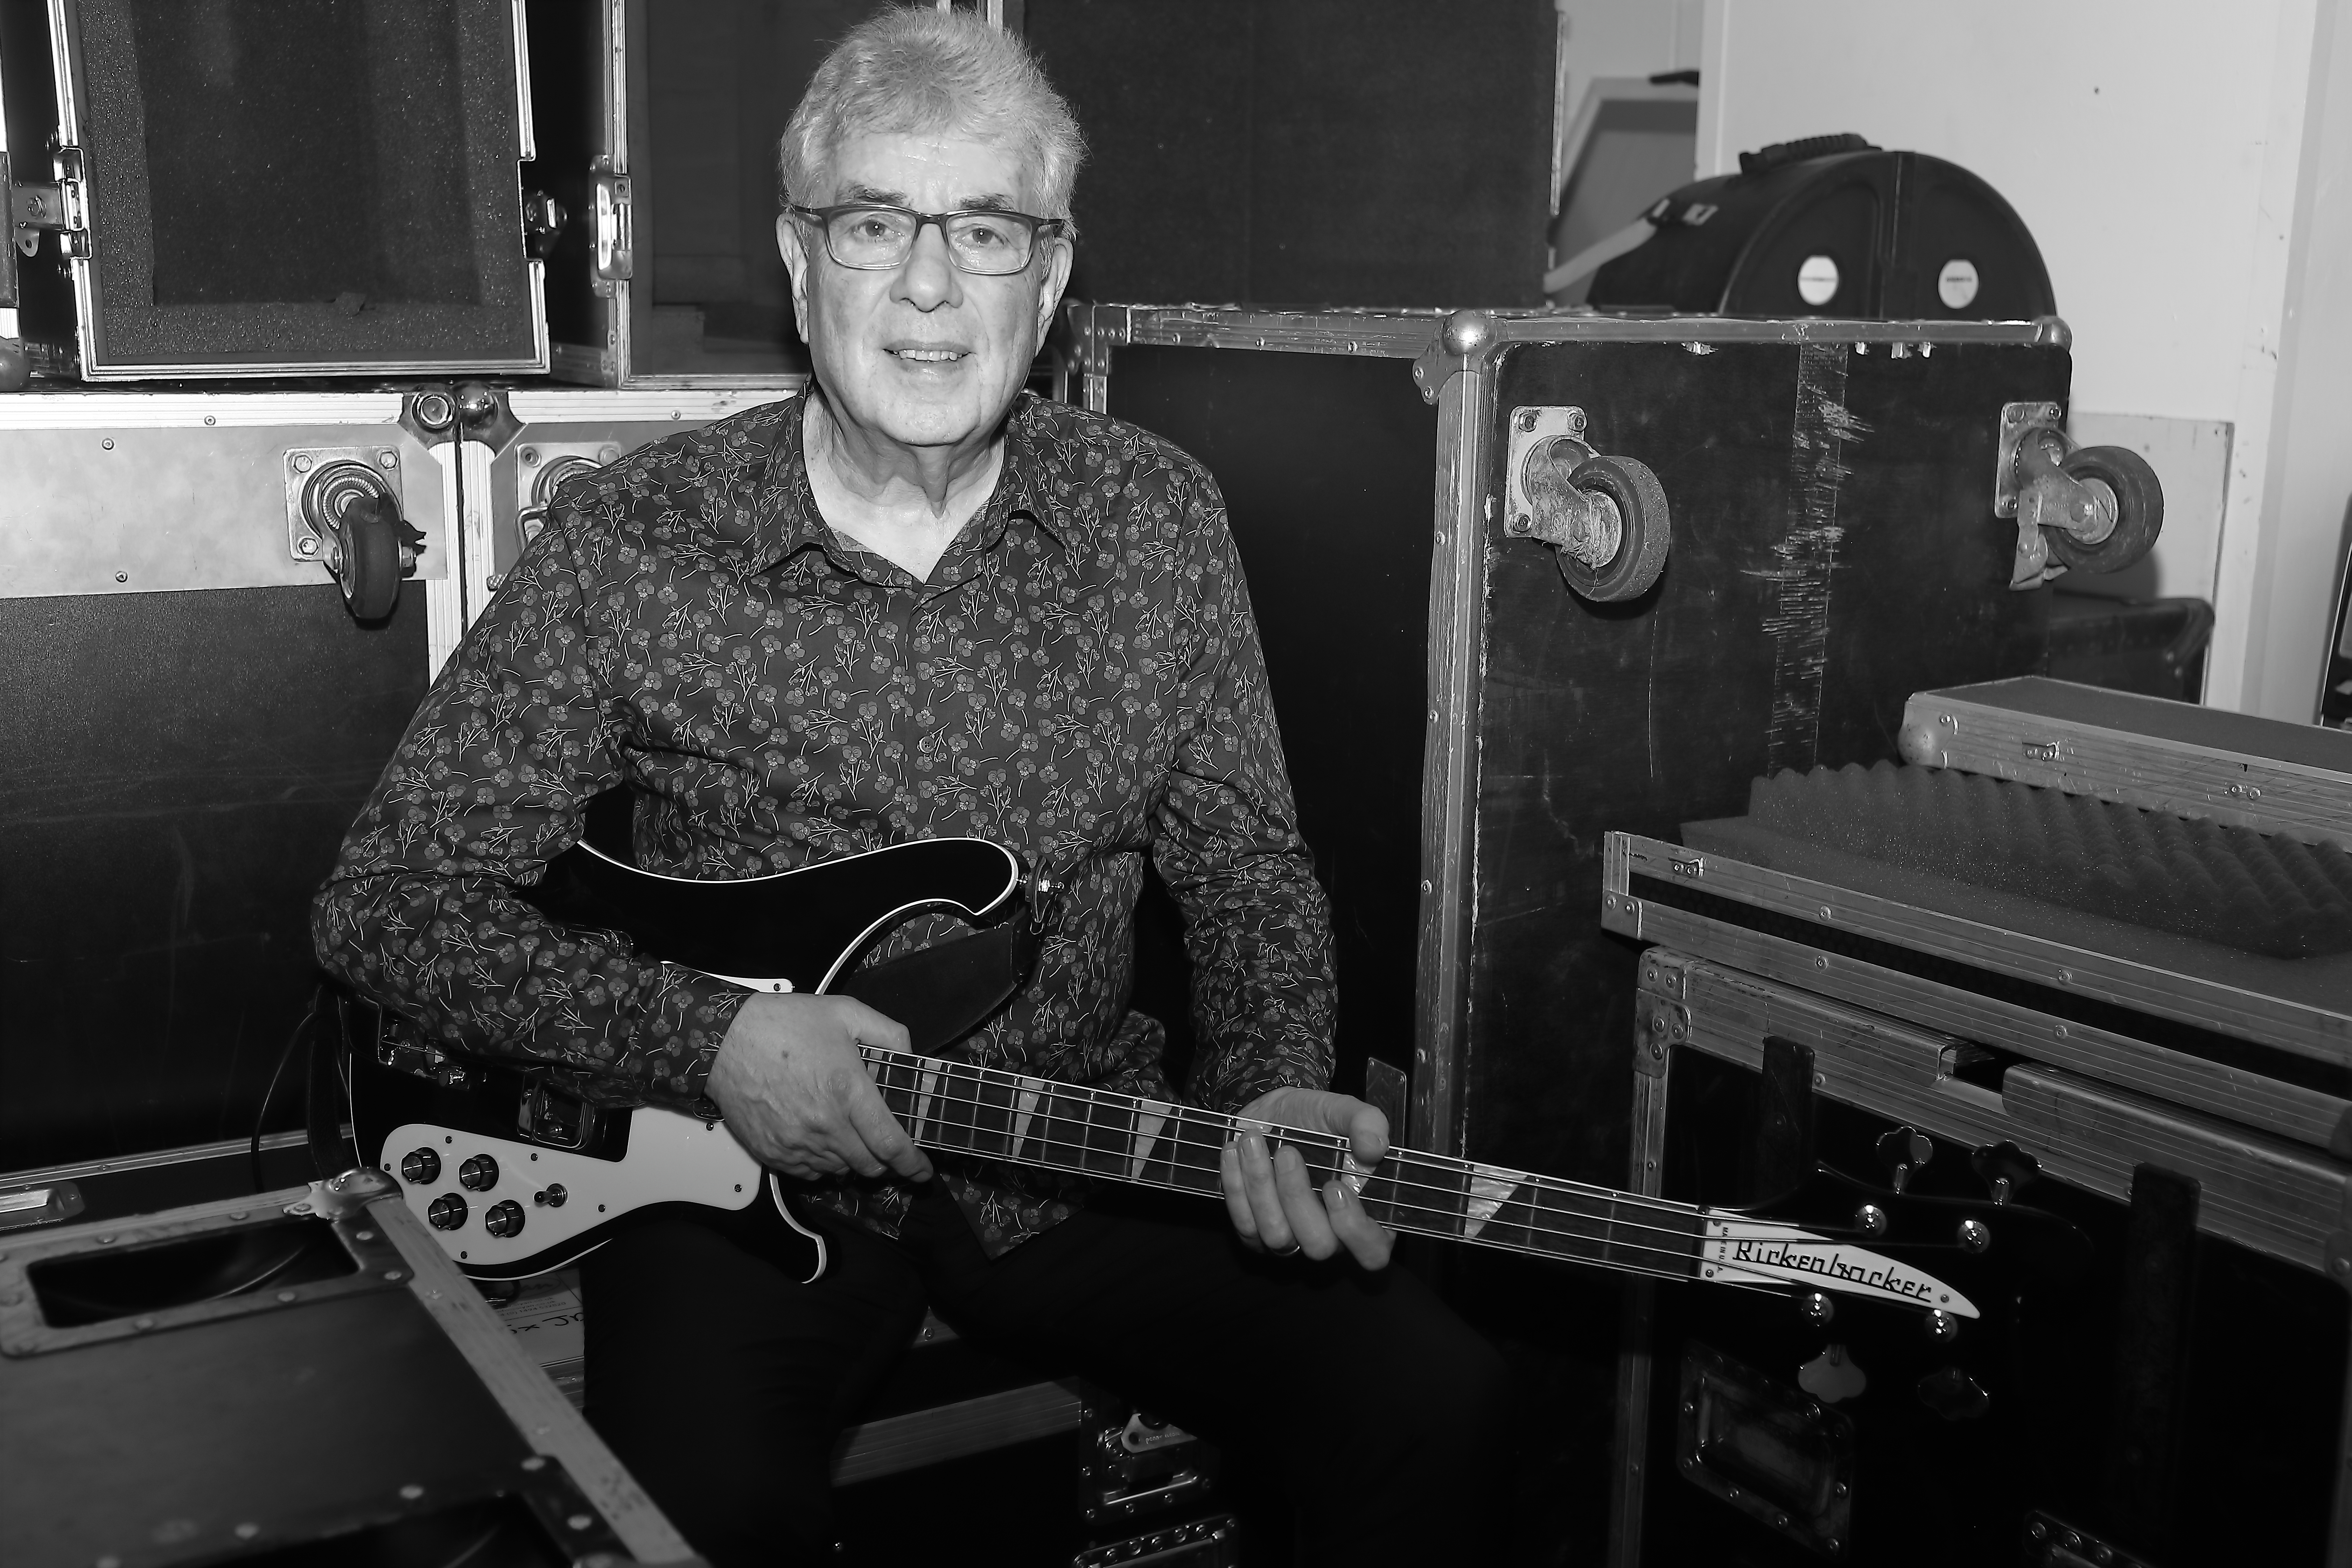 Stockport Sounds: Stockport celebrates GM Town of Culture - In conversation with 10cc’s Graham Gouldman